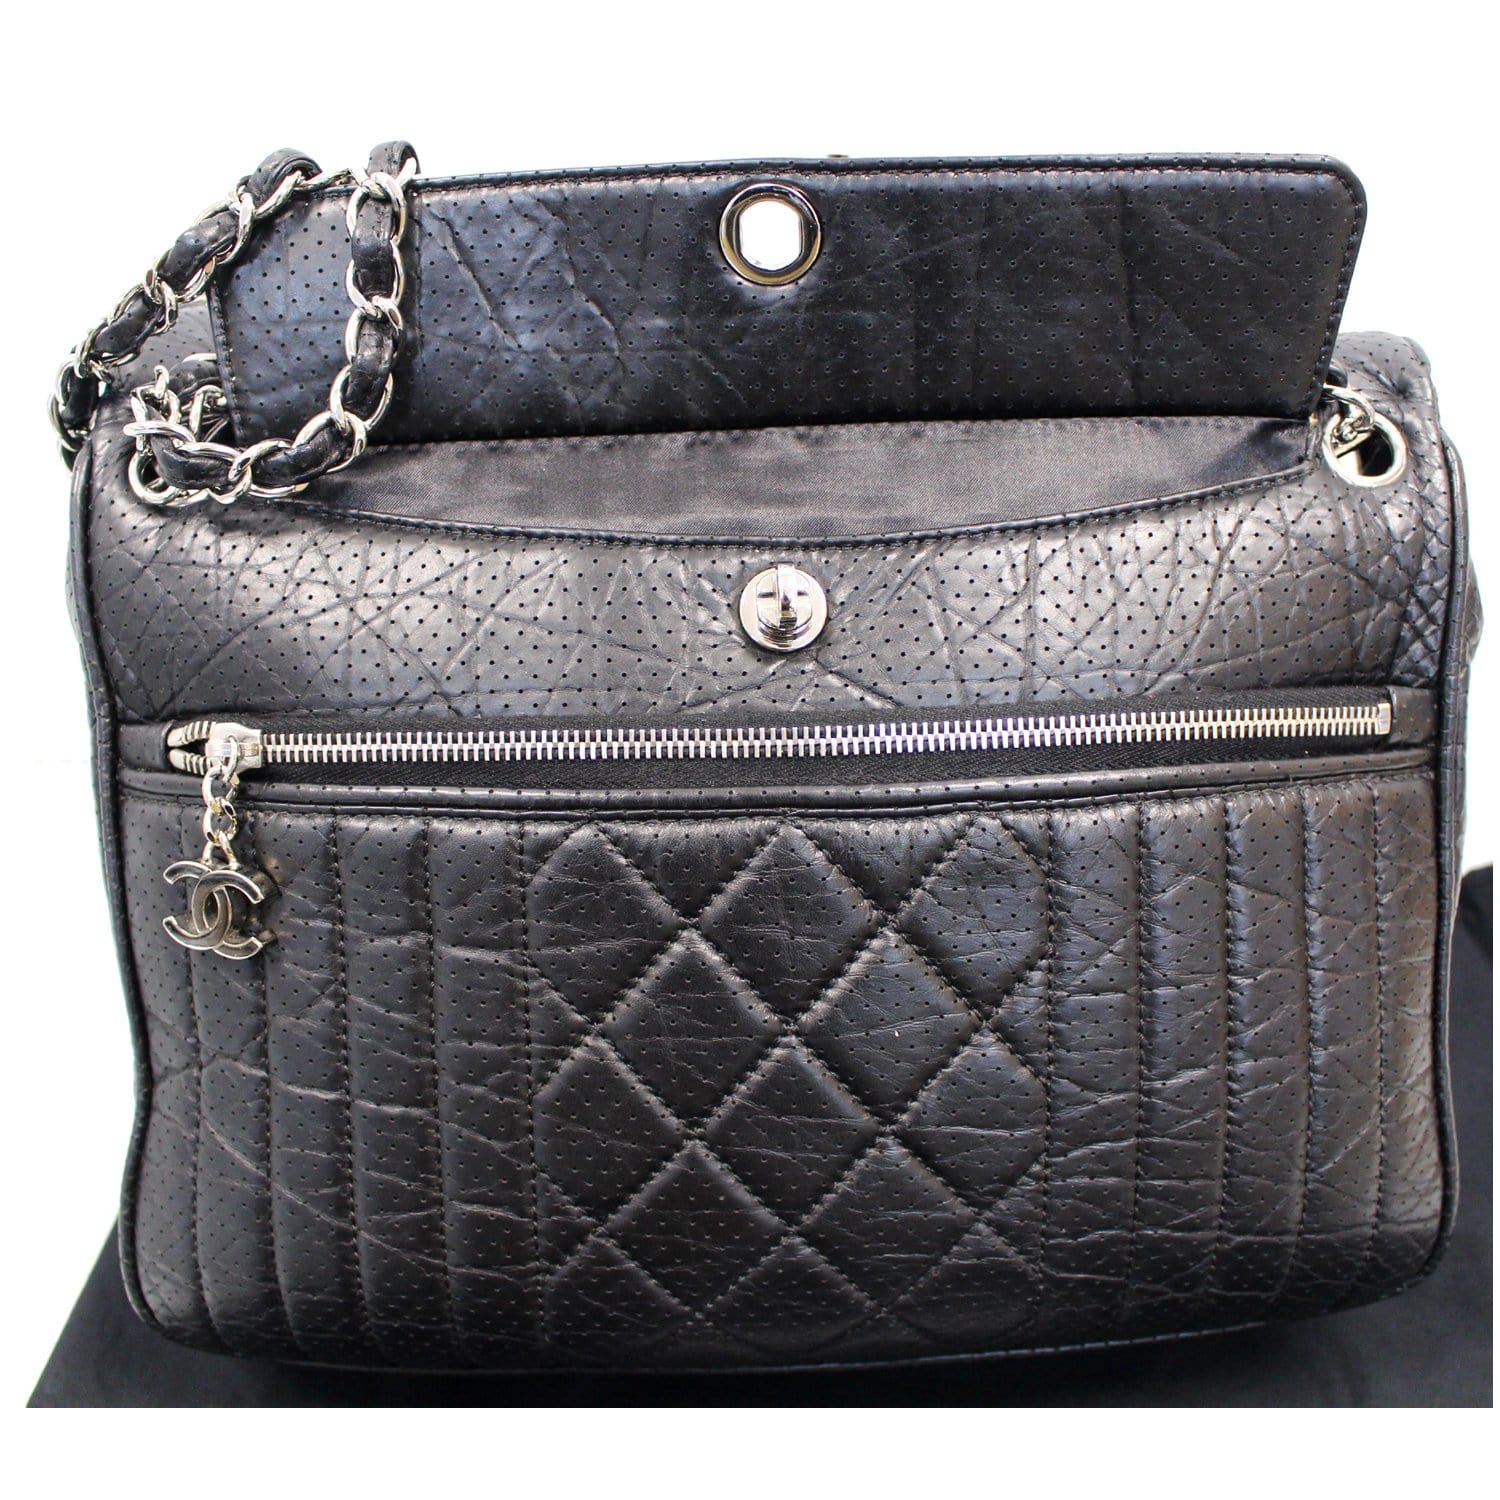 Chanel Calfskin Perforated 50's Bowler Bag - 20% OFF